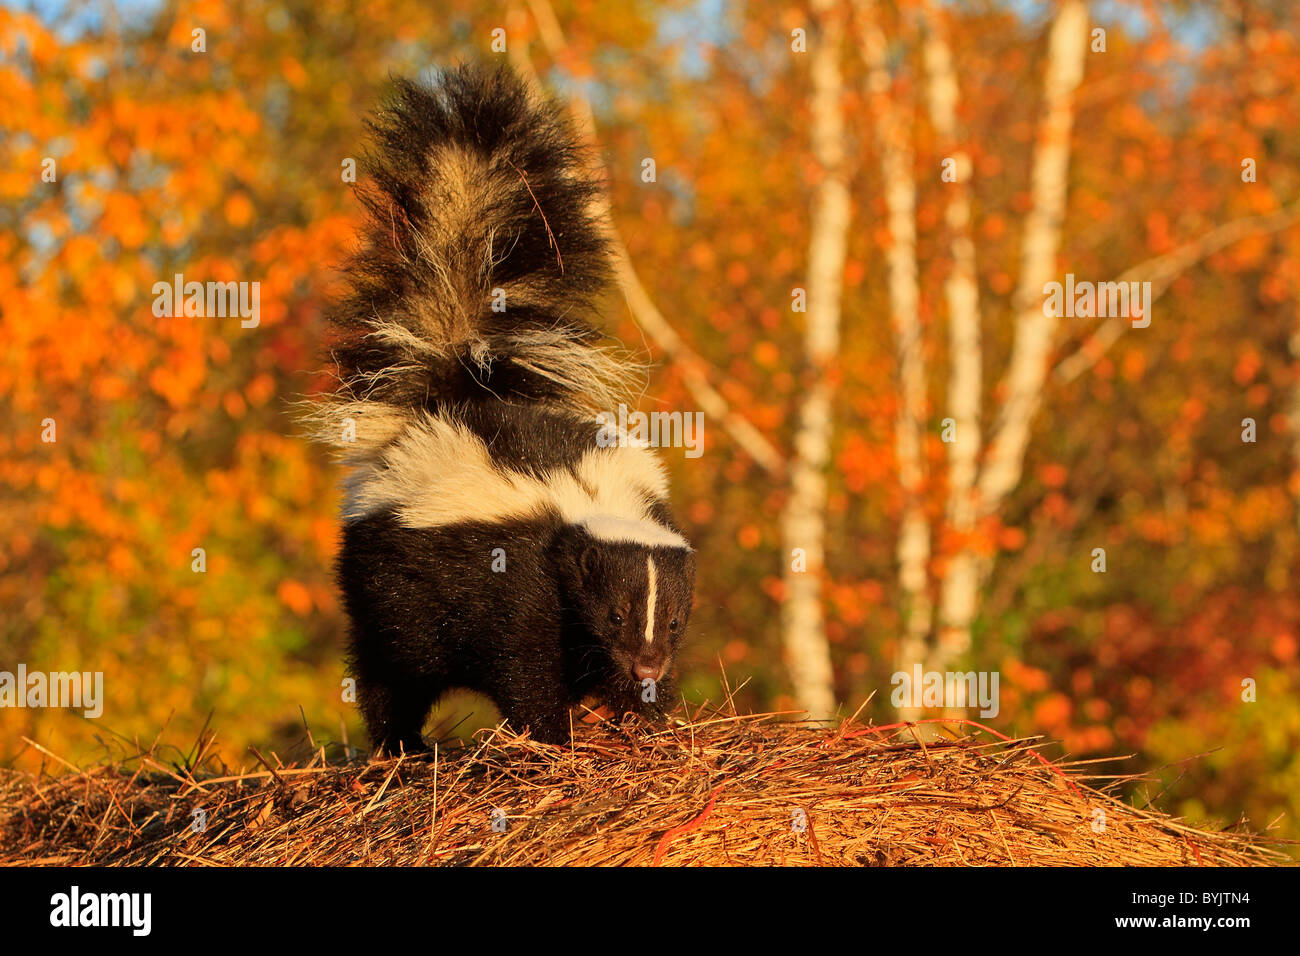 Striped Skunk (Mephitis mephitis) standing on the ground with trees in autumn colours in background. Stock Photo